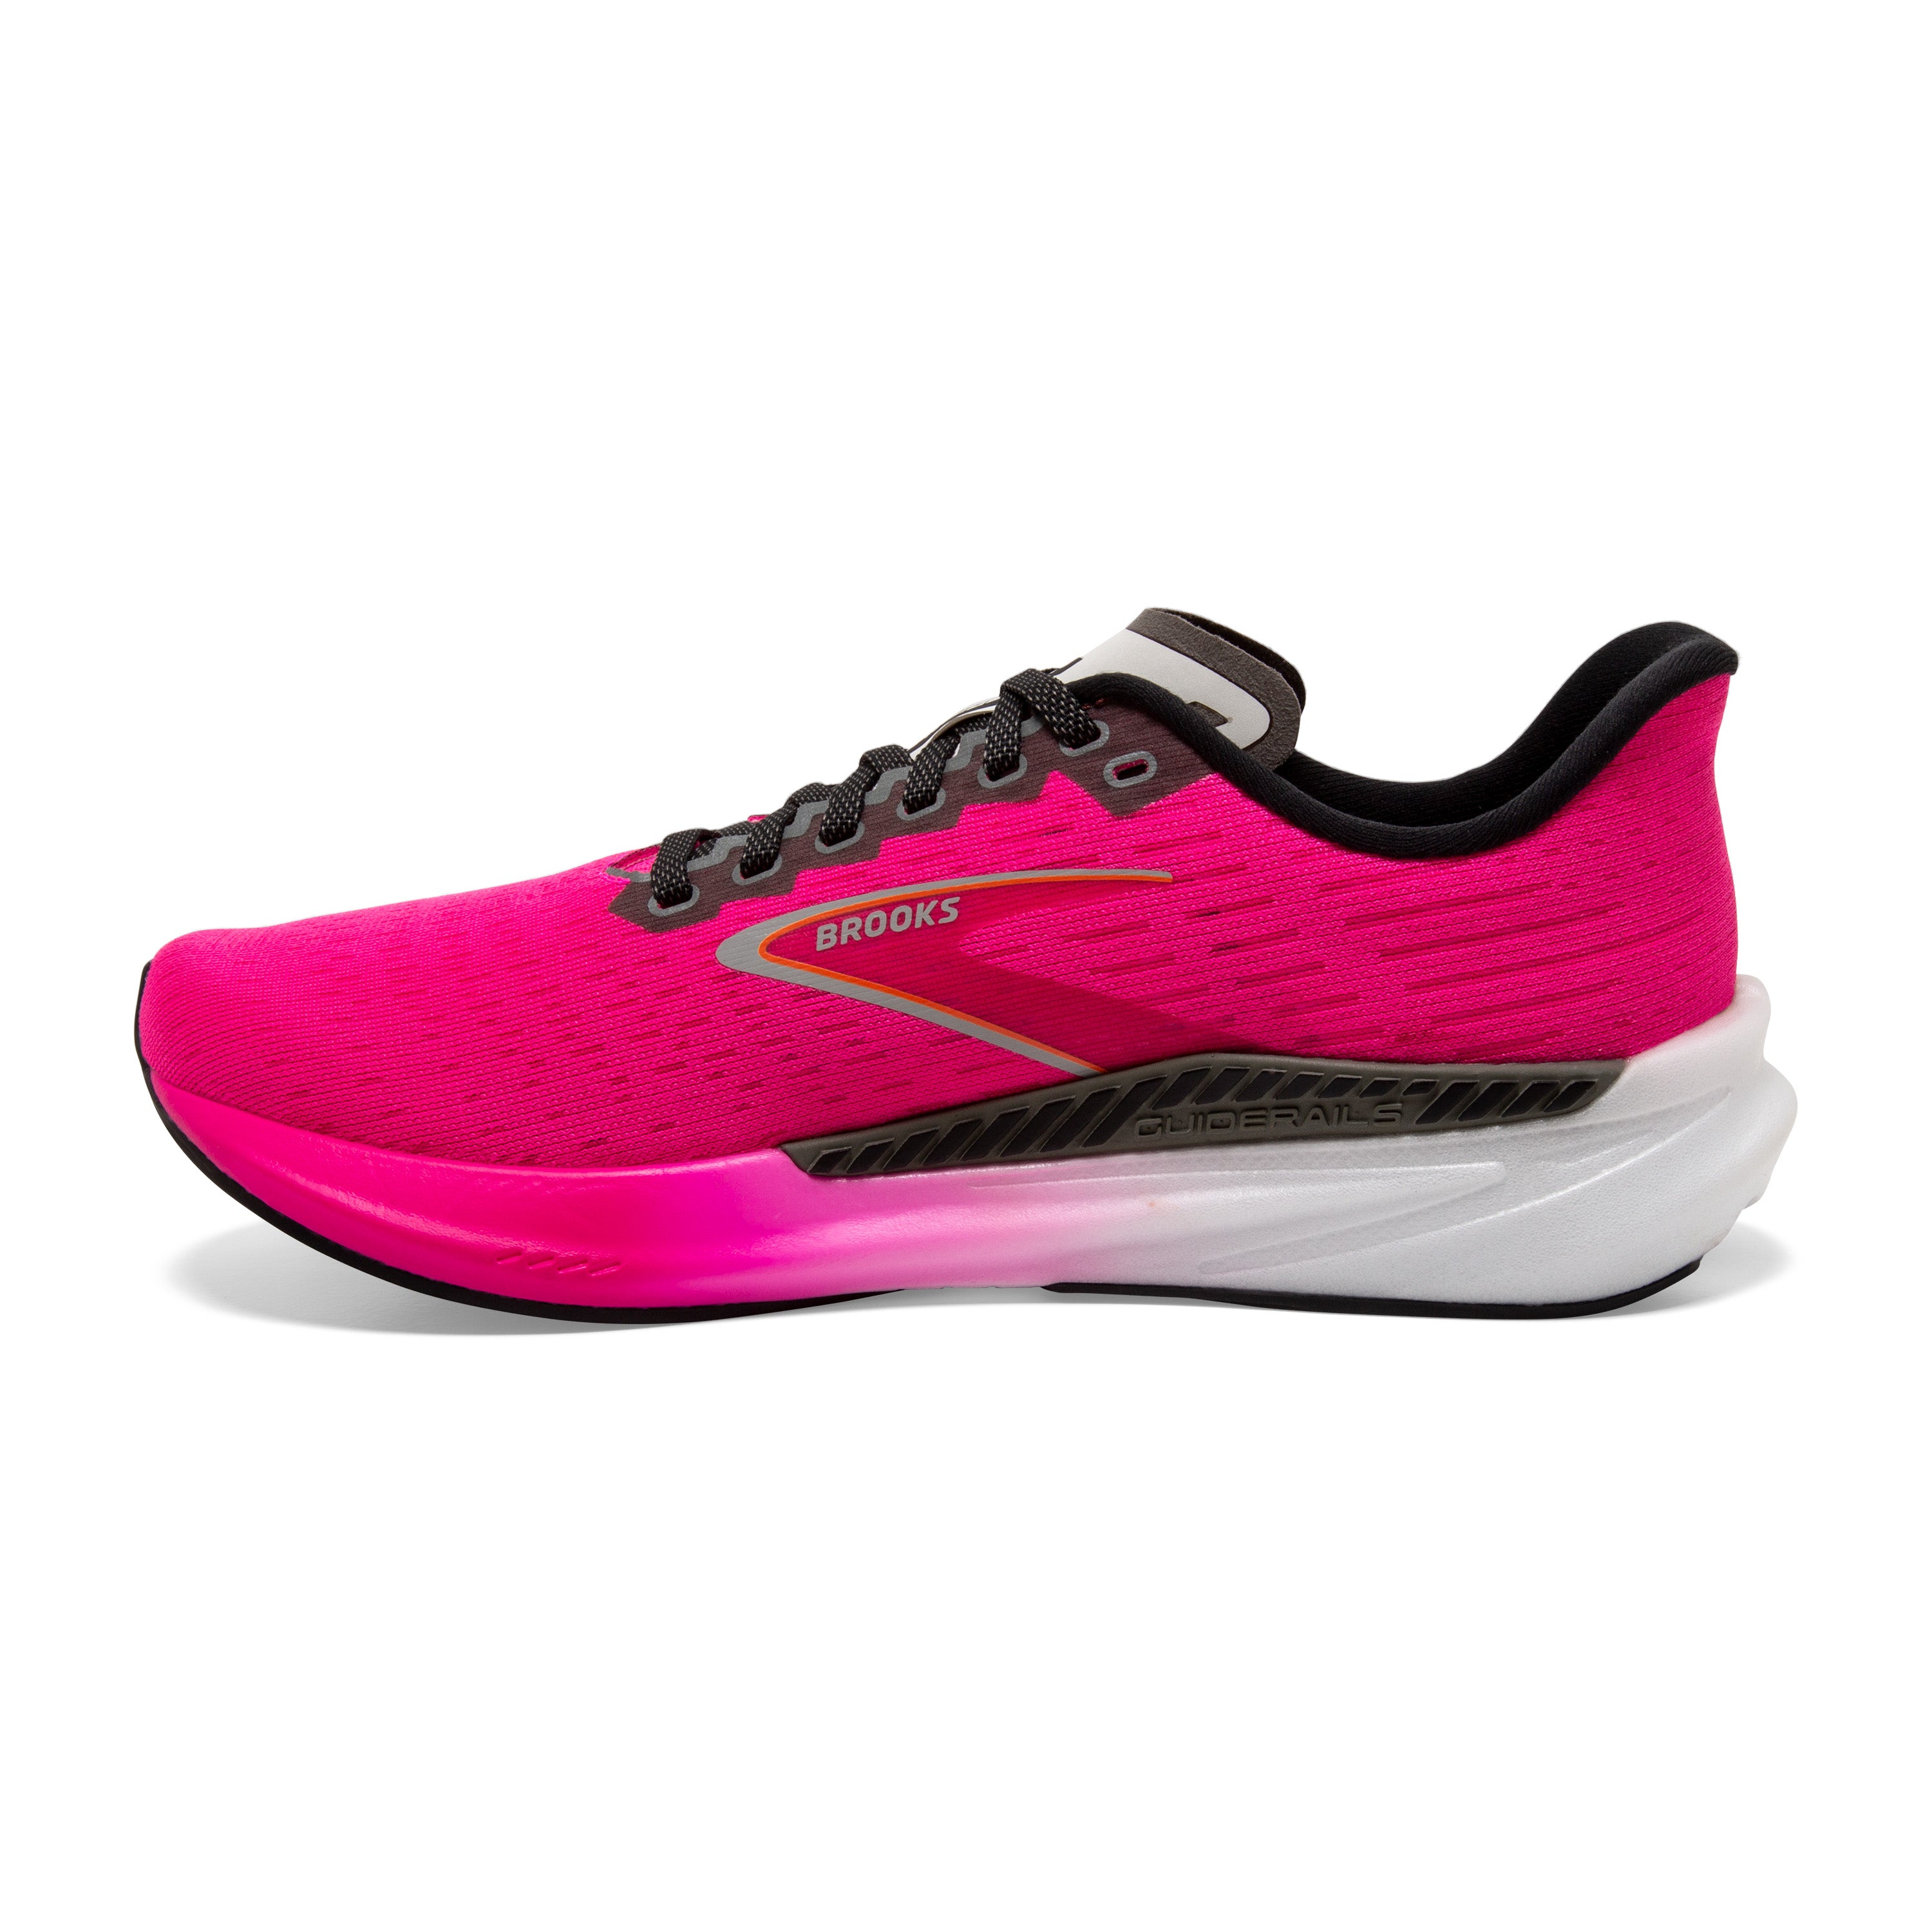 Hyperion GTS - Women's Road Running Shoes